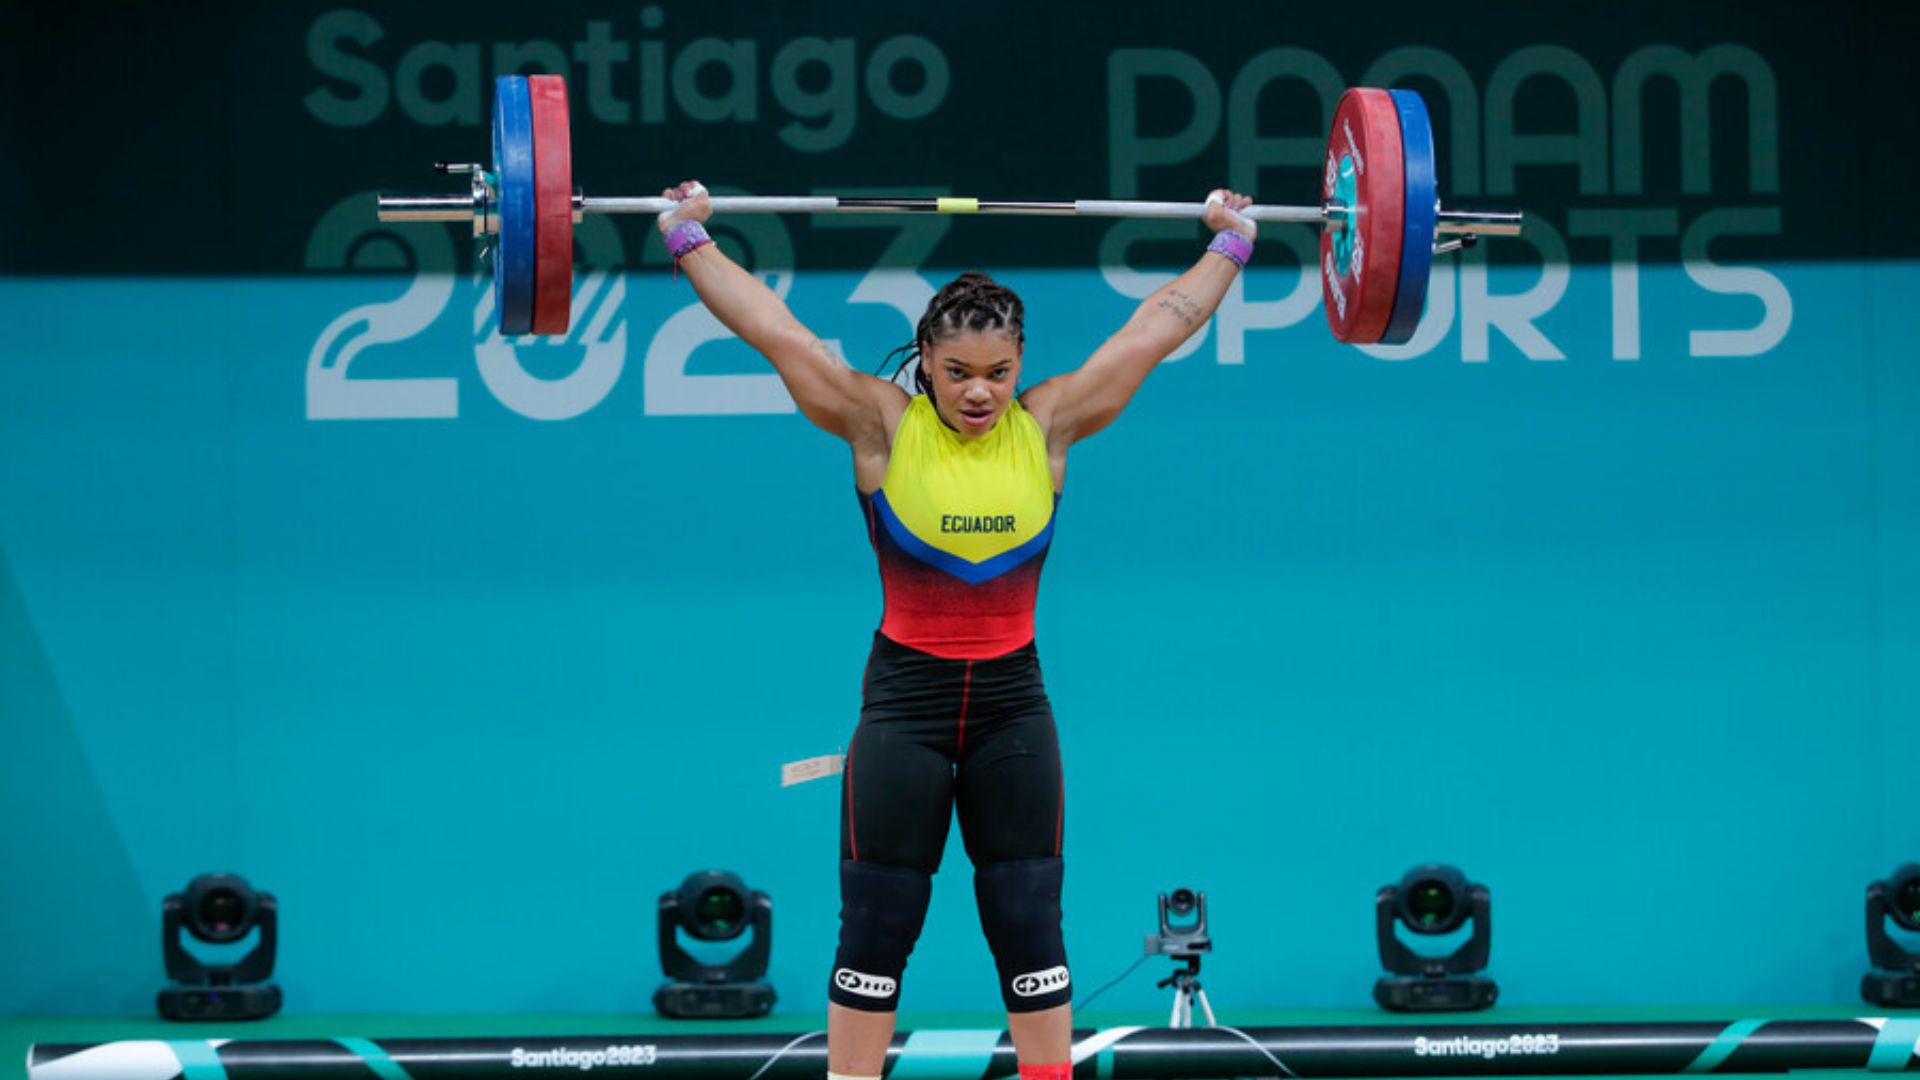 Angie Palacios asserts favoritism, wins gold in Pan American weightlifting